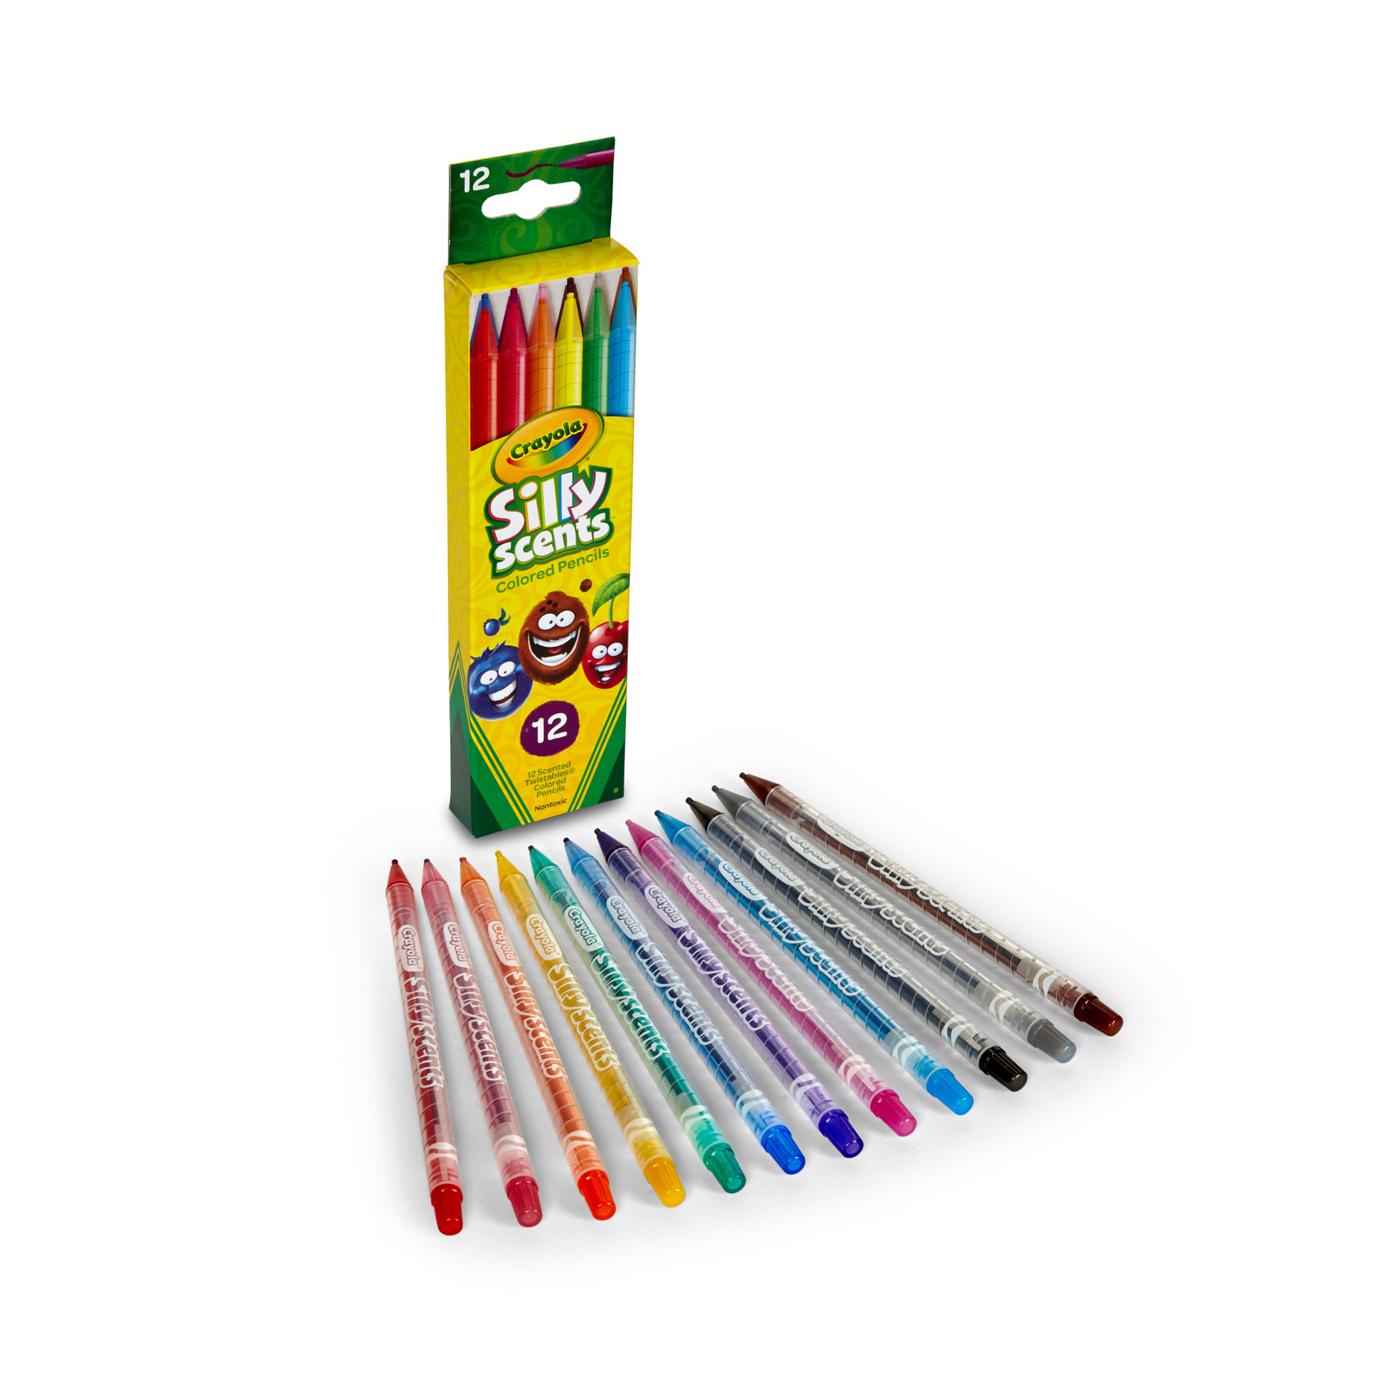 Crayola Silly Scents Colored Pencils; image 2 of 2